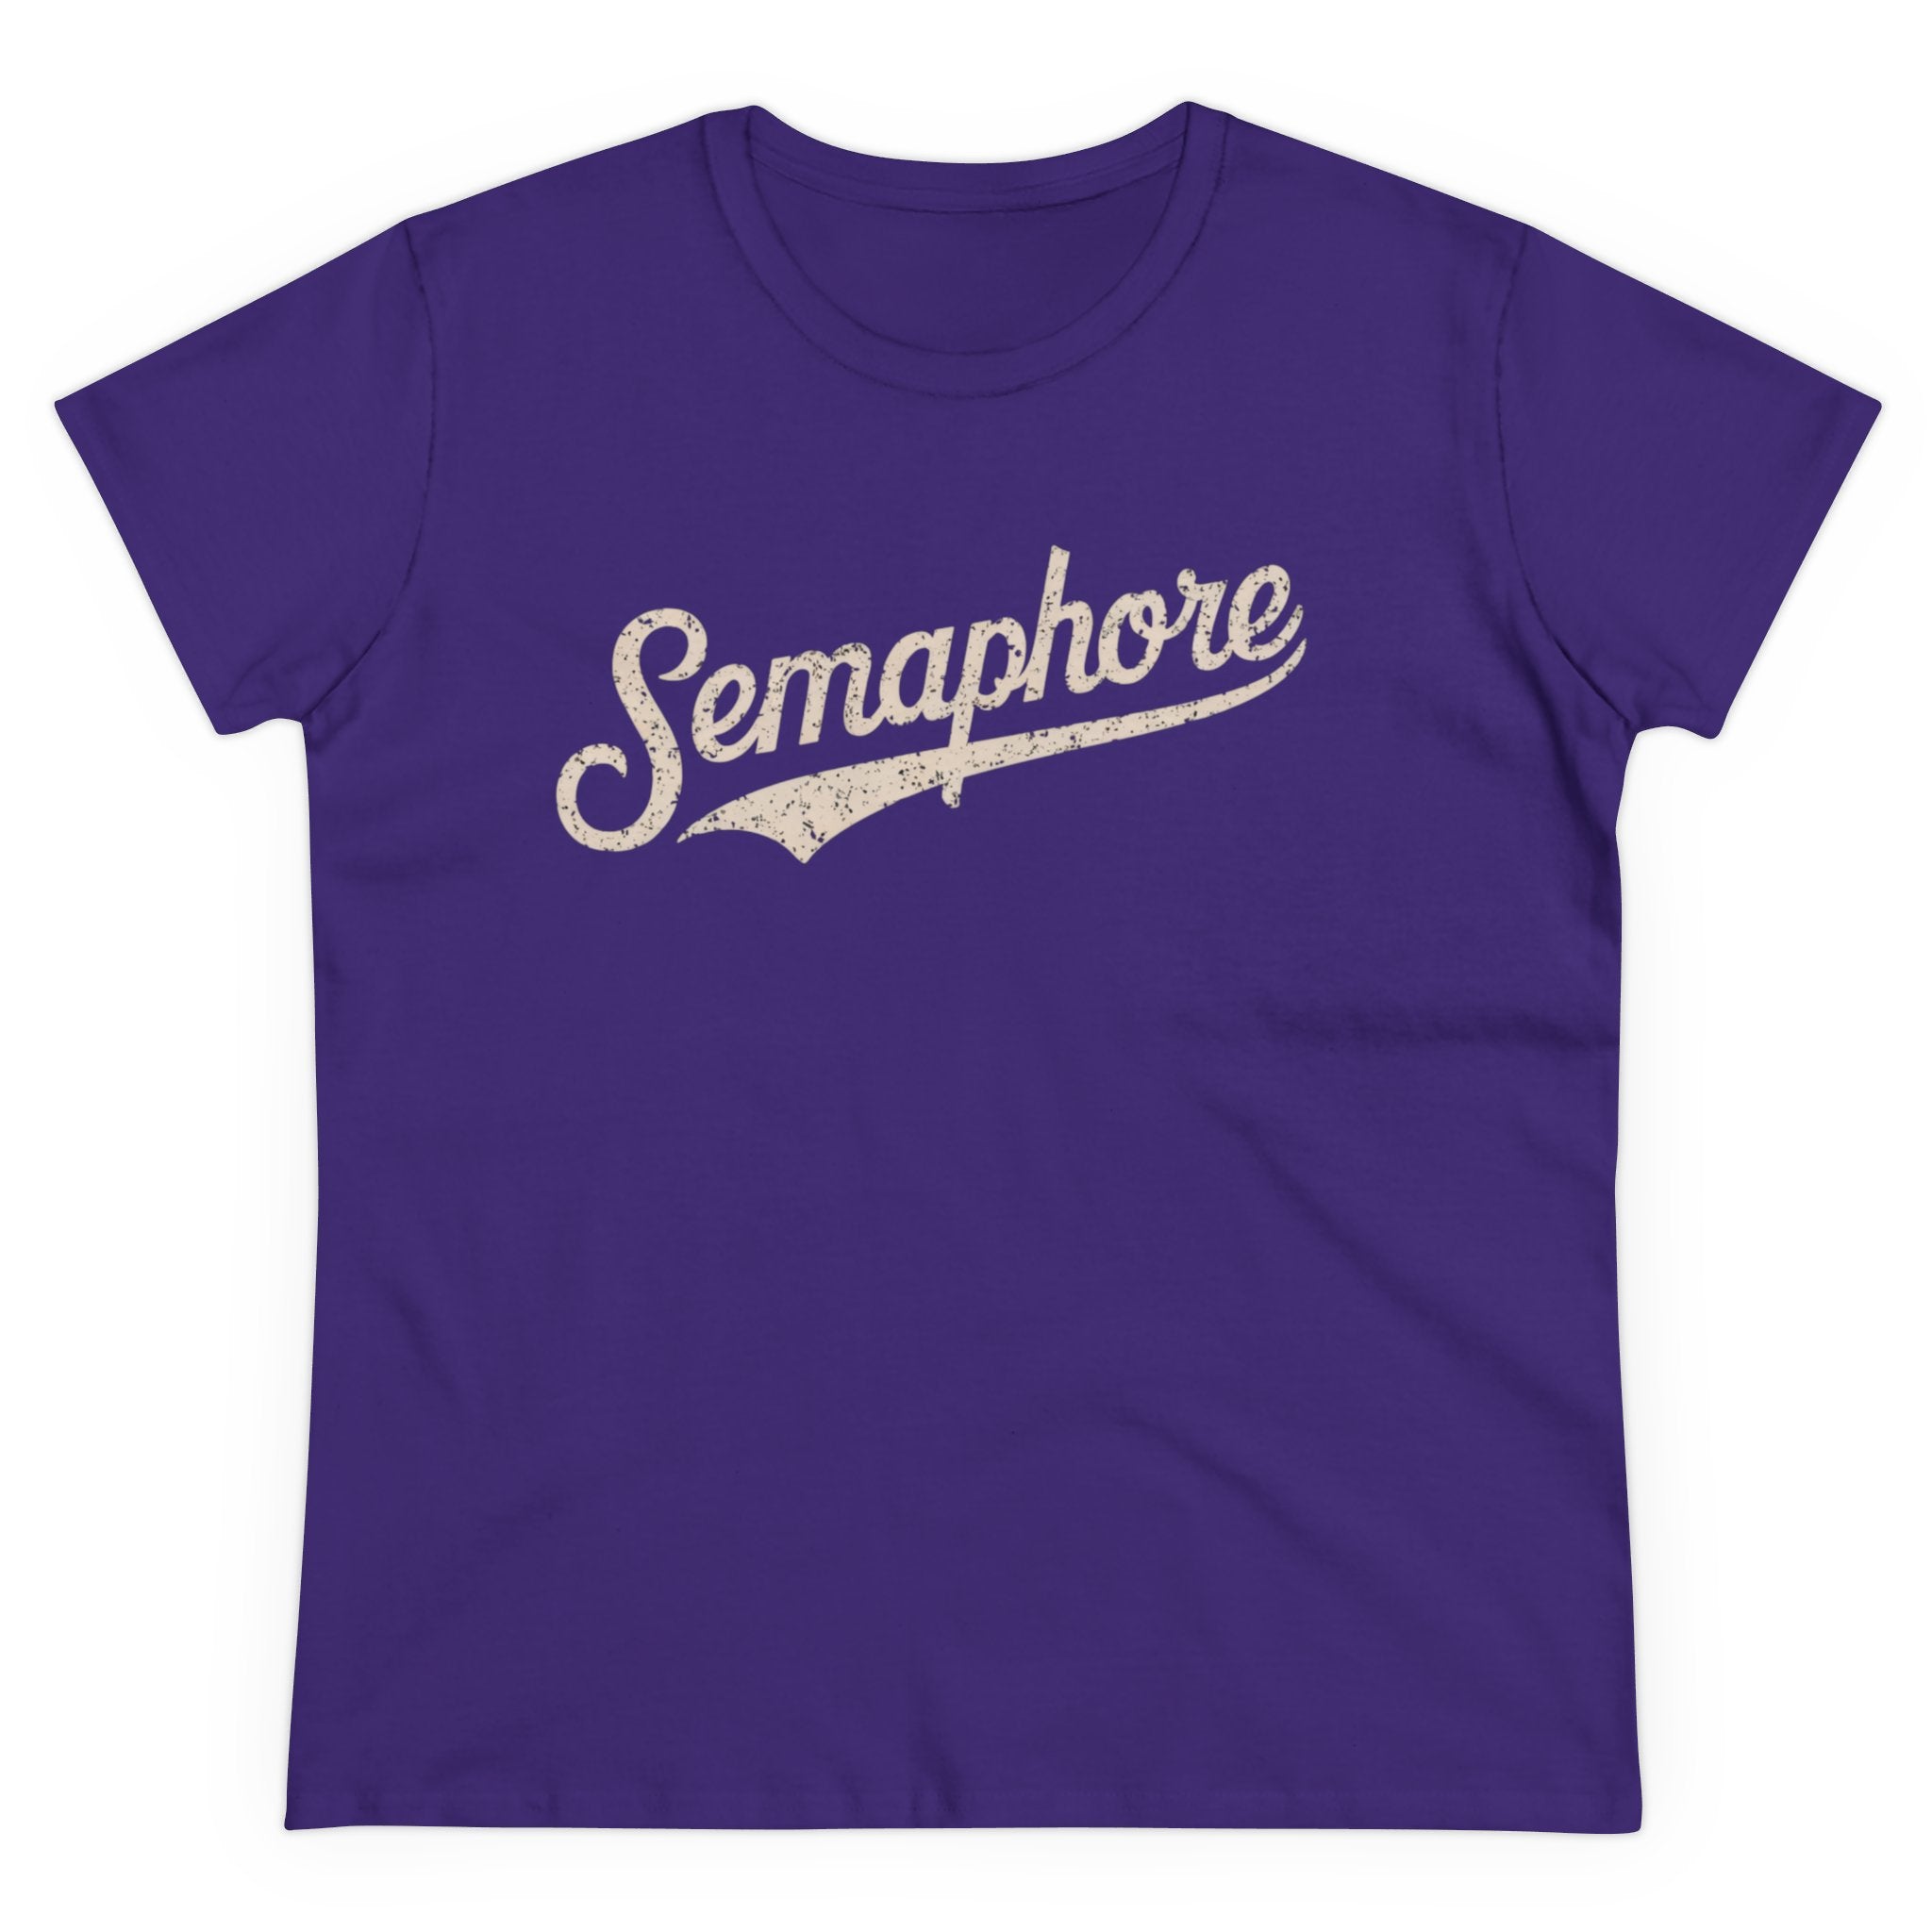 Semaphore - Women's Tee in purple with the word "Semaphore" written in a vintage-style, cursive font across the front, blending comfort and style with its contoured fit.